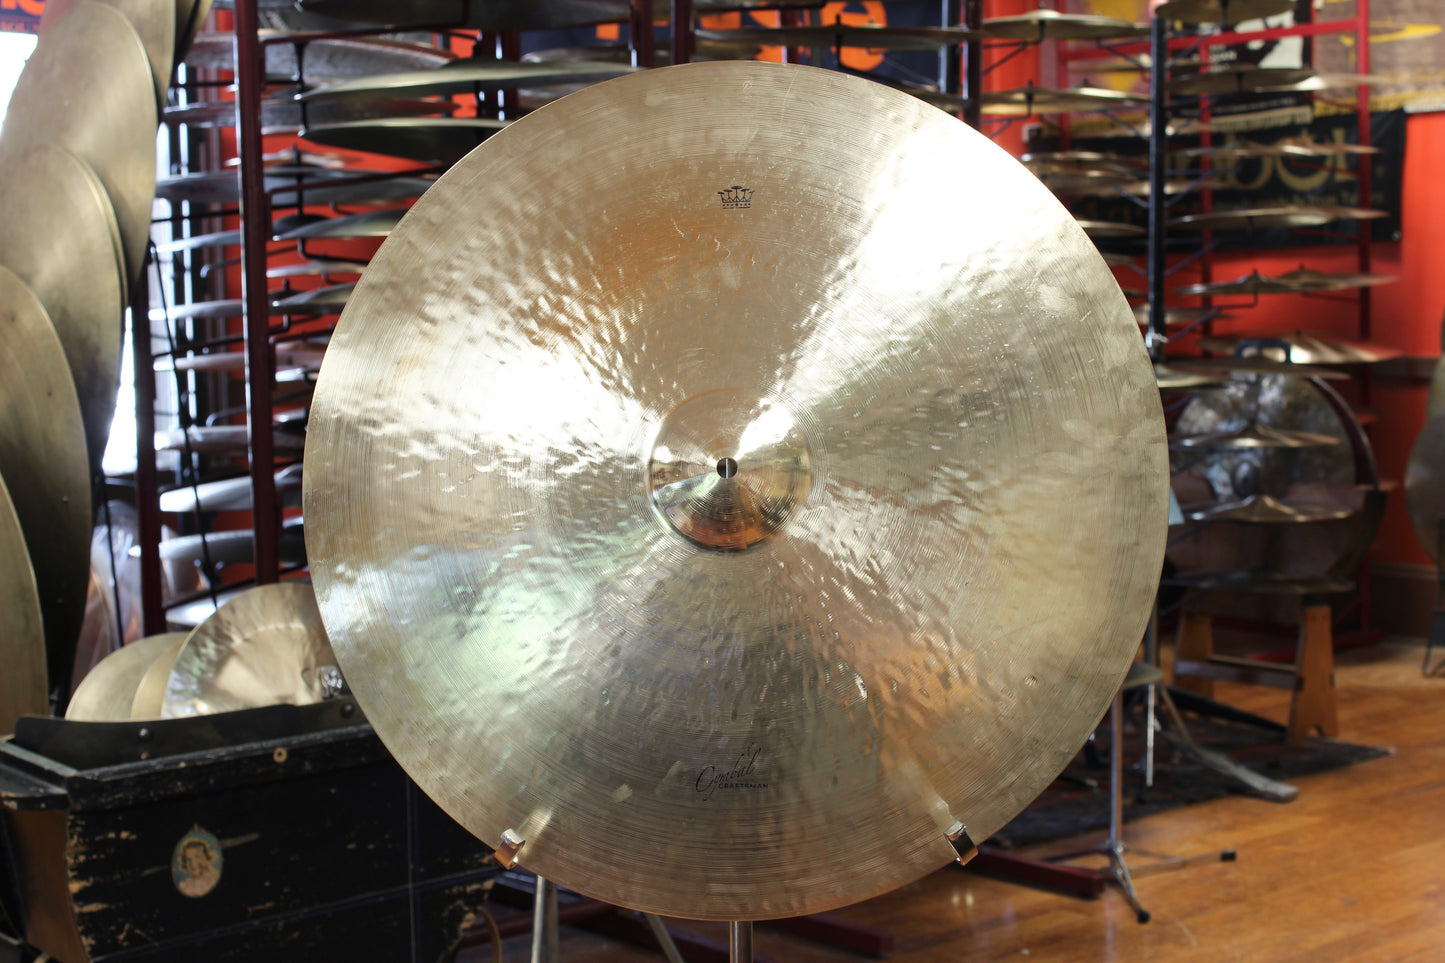 Cymbal Craftsman 22" Small Bell Thin Ride 2288g